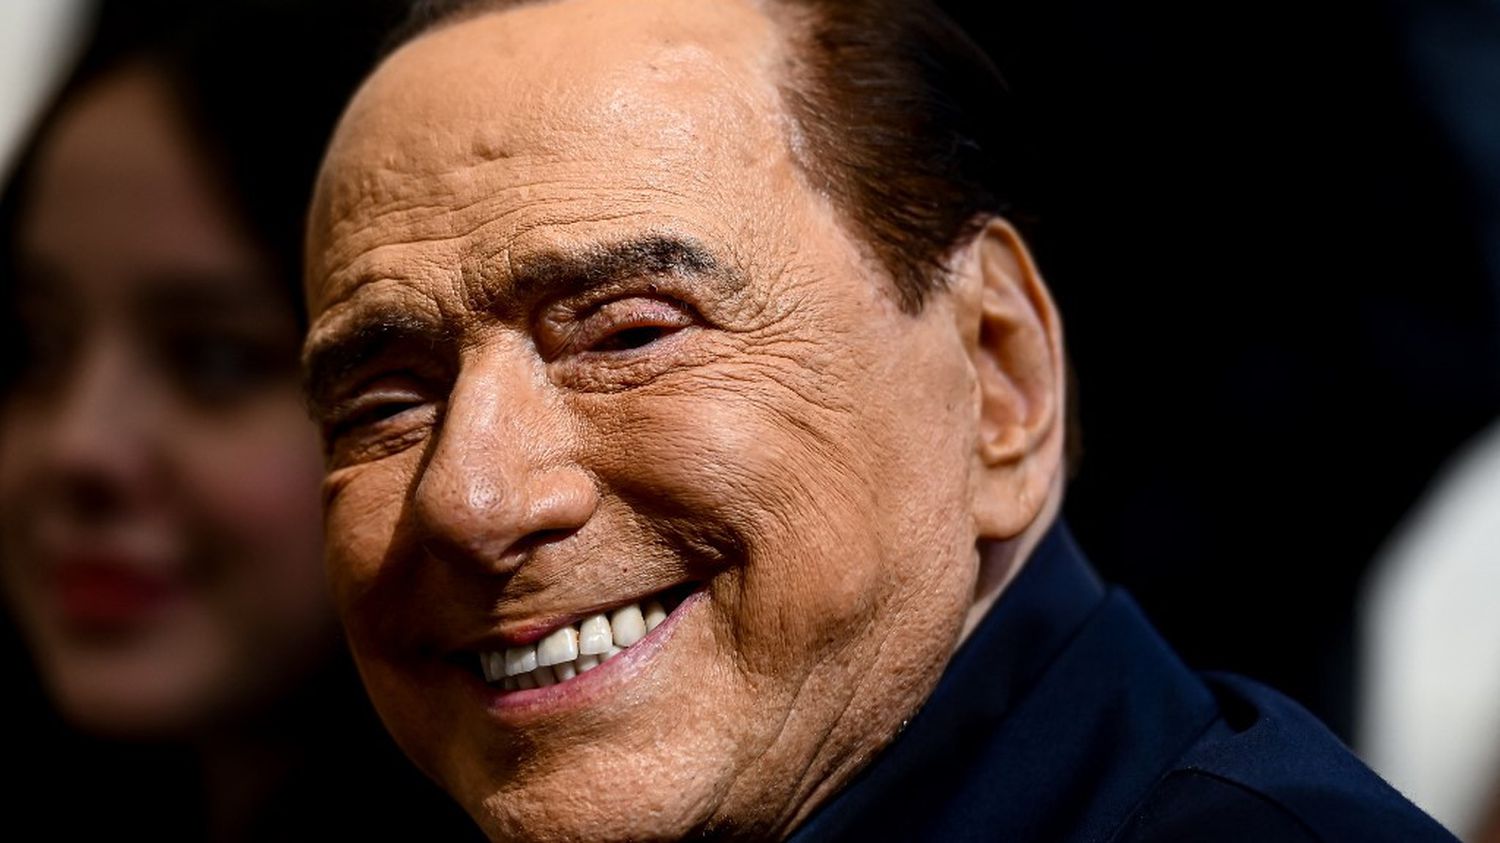 Italy: Silvio Berlusconi plans to return to Parliament, ten years after being ousted for tax evasion
